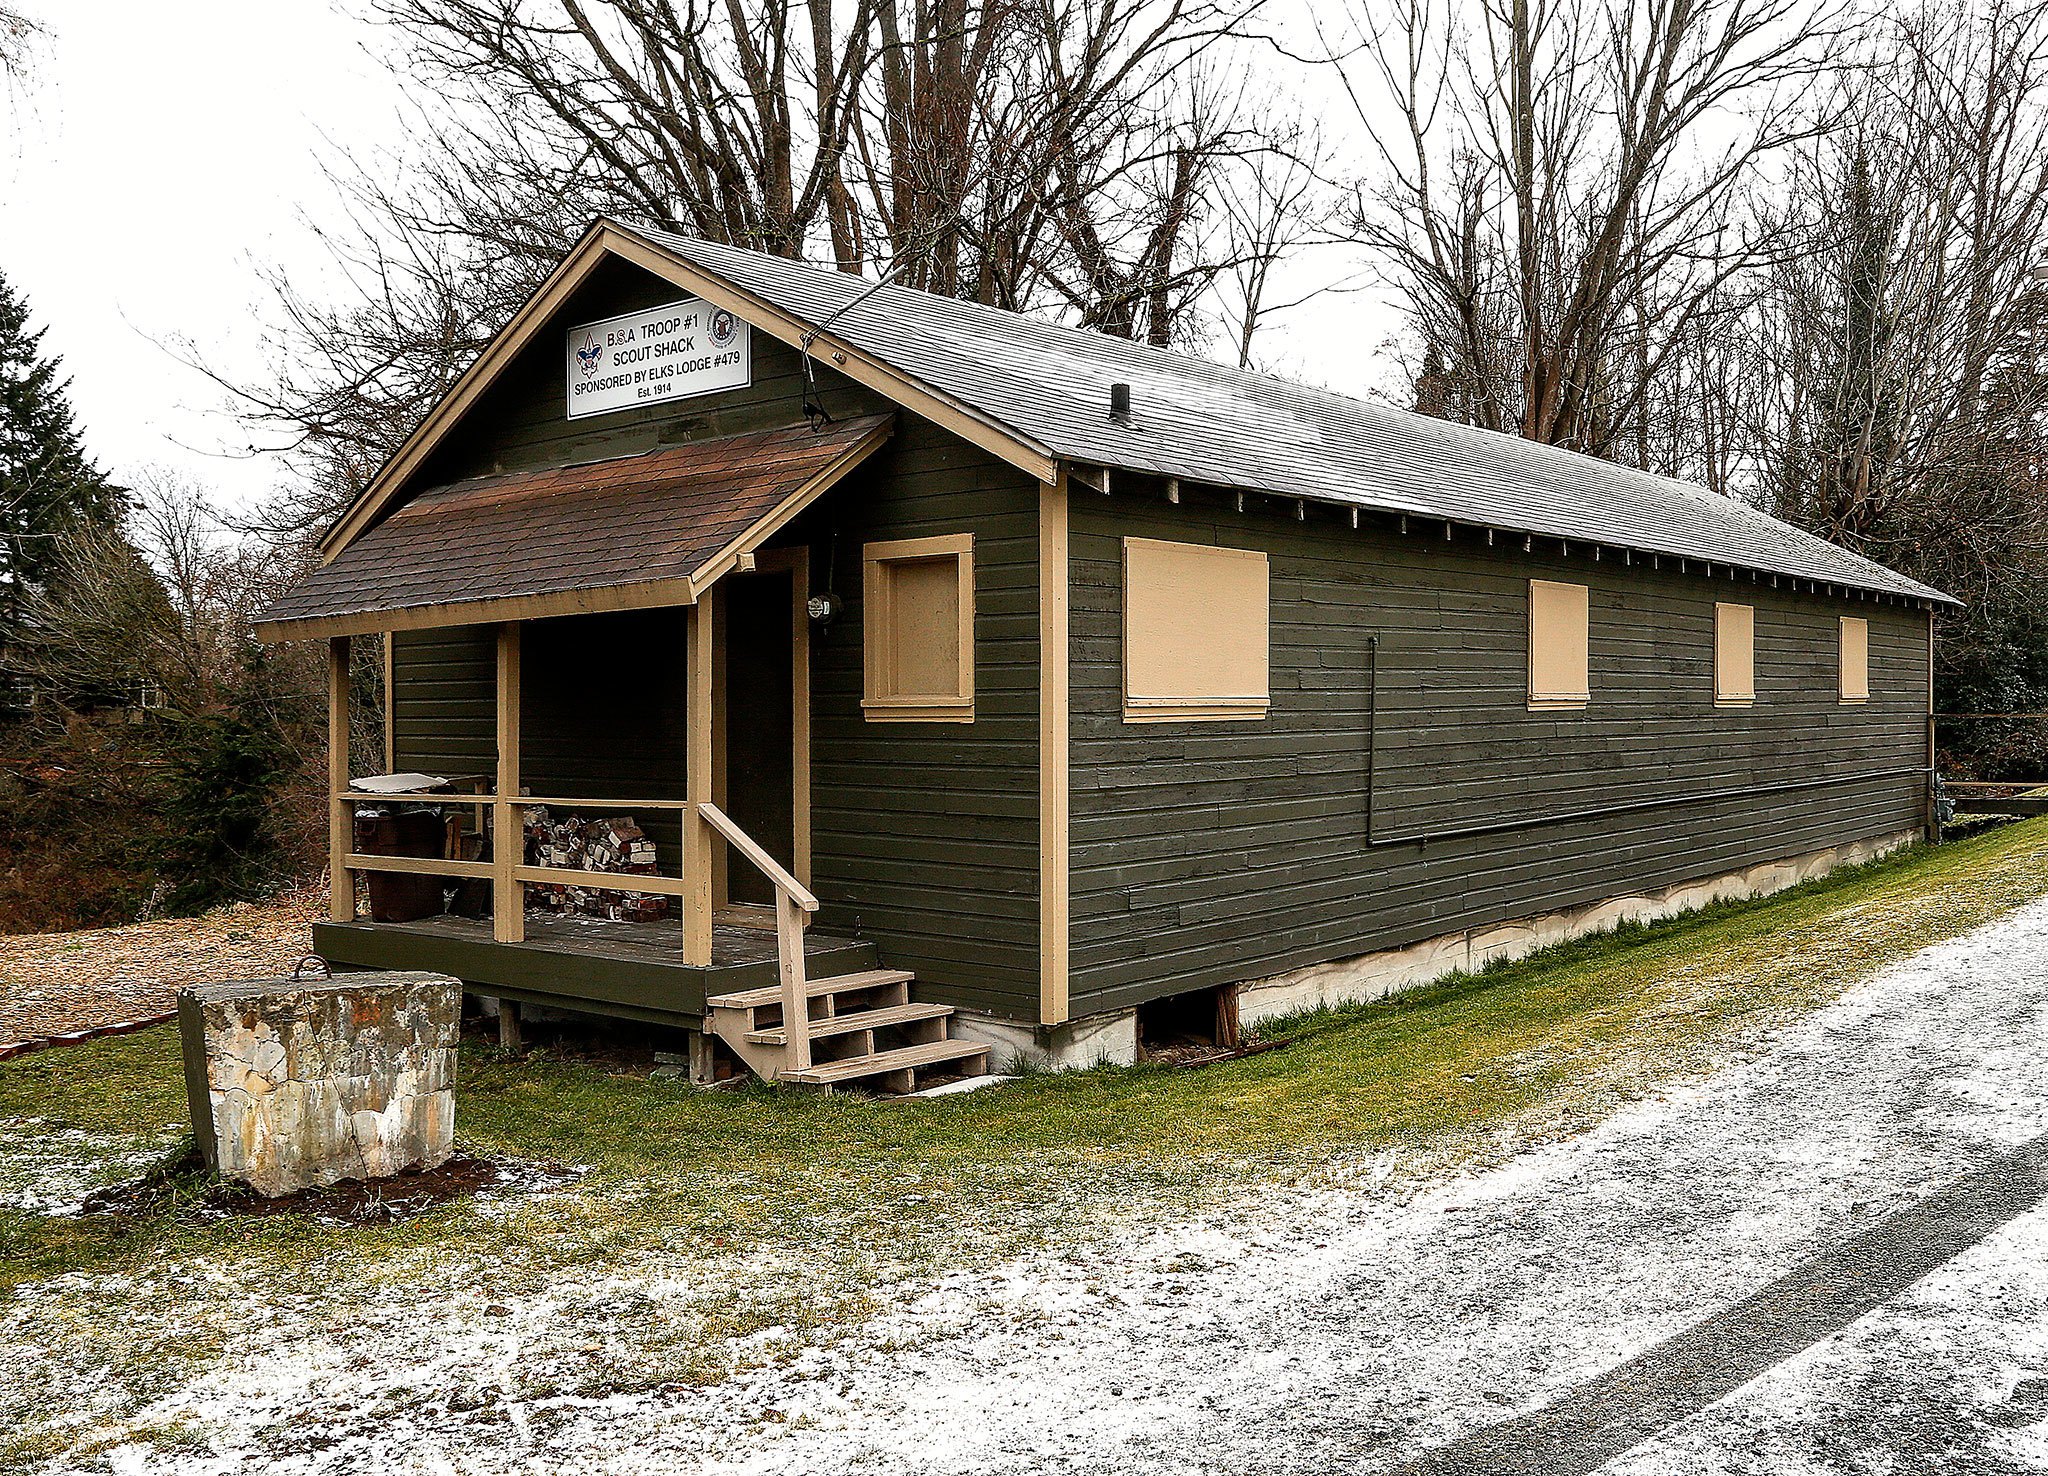 The Boy Scout Troop 1 “Scout Shack,” just east of the intersection of Nassau and 34th streets in Everett, will host an open house 5-7 p.m. Wednesday. Once a military barrack at Paine Field, the building is in need of repairs. (Dan Bates / The Herald)